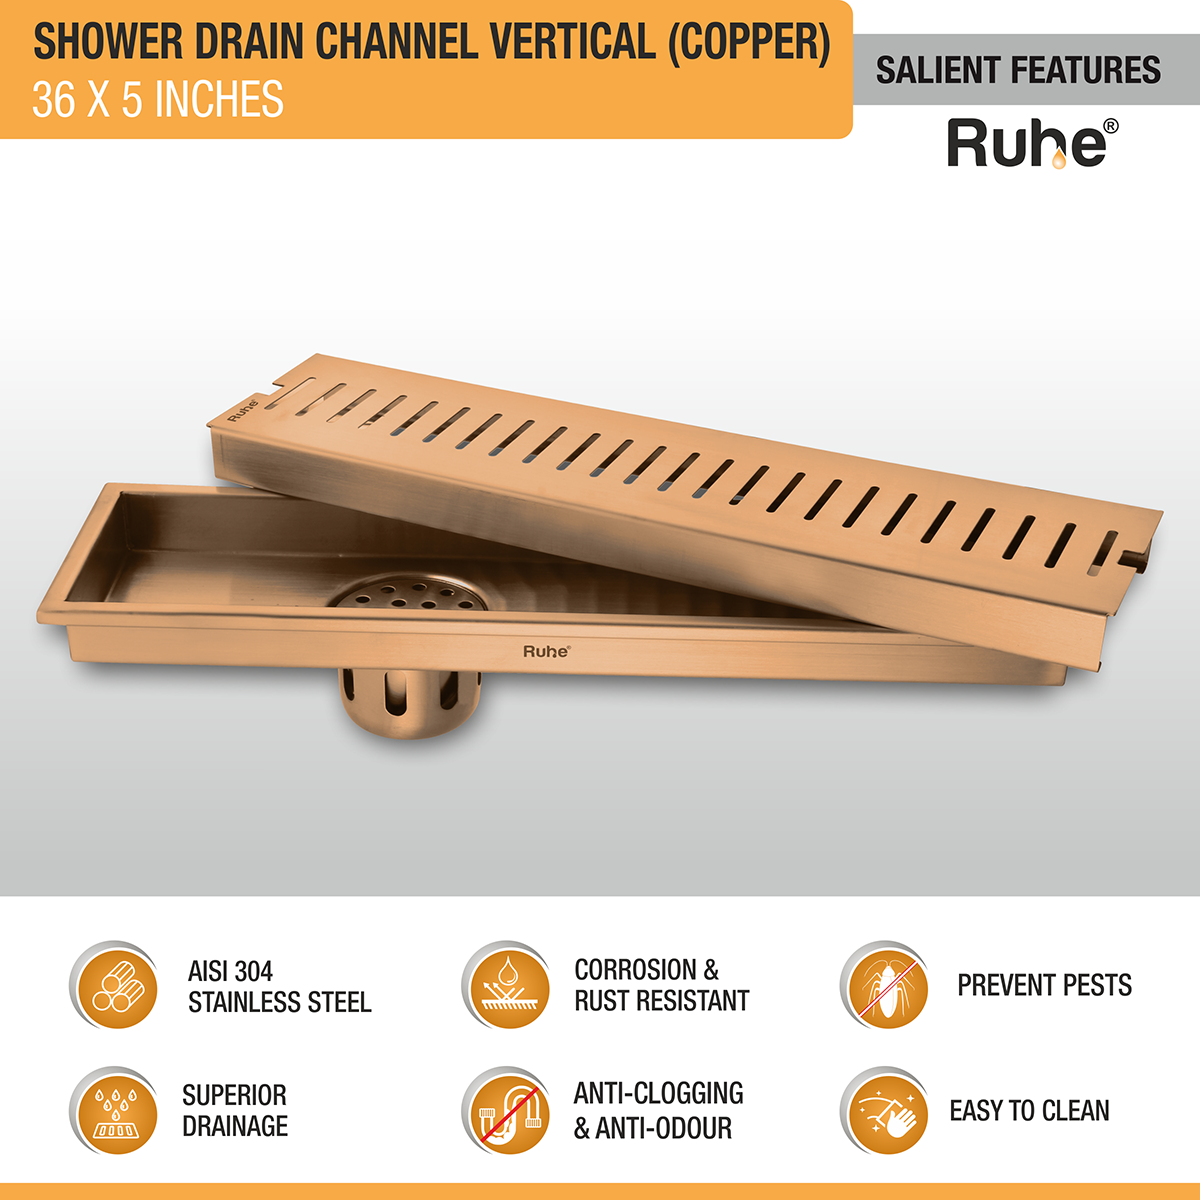 Vertical Shower Drain Channel (36 x 5 Inches) ROSE GOLD/ANTIQUE COPPER features